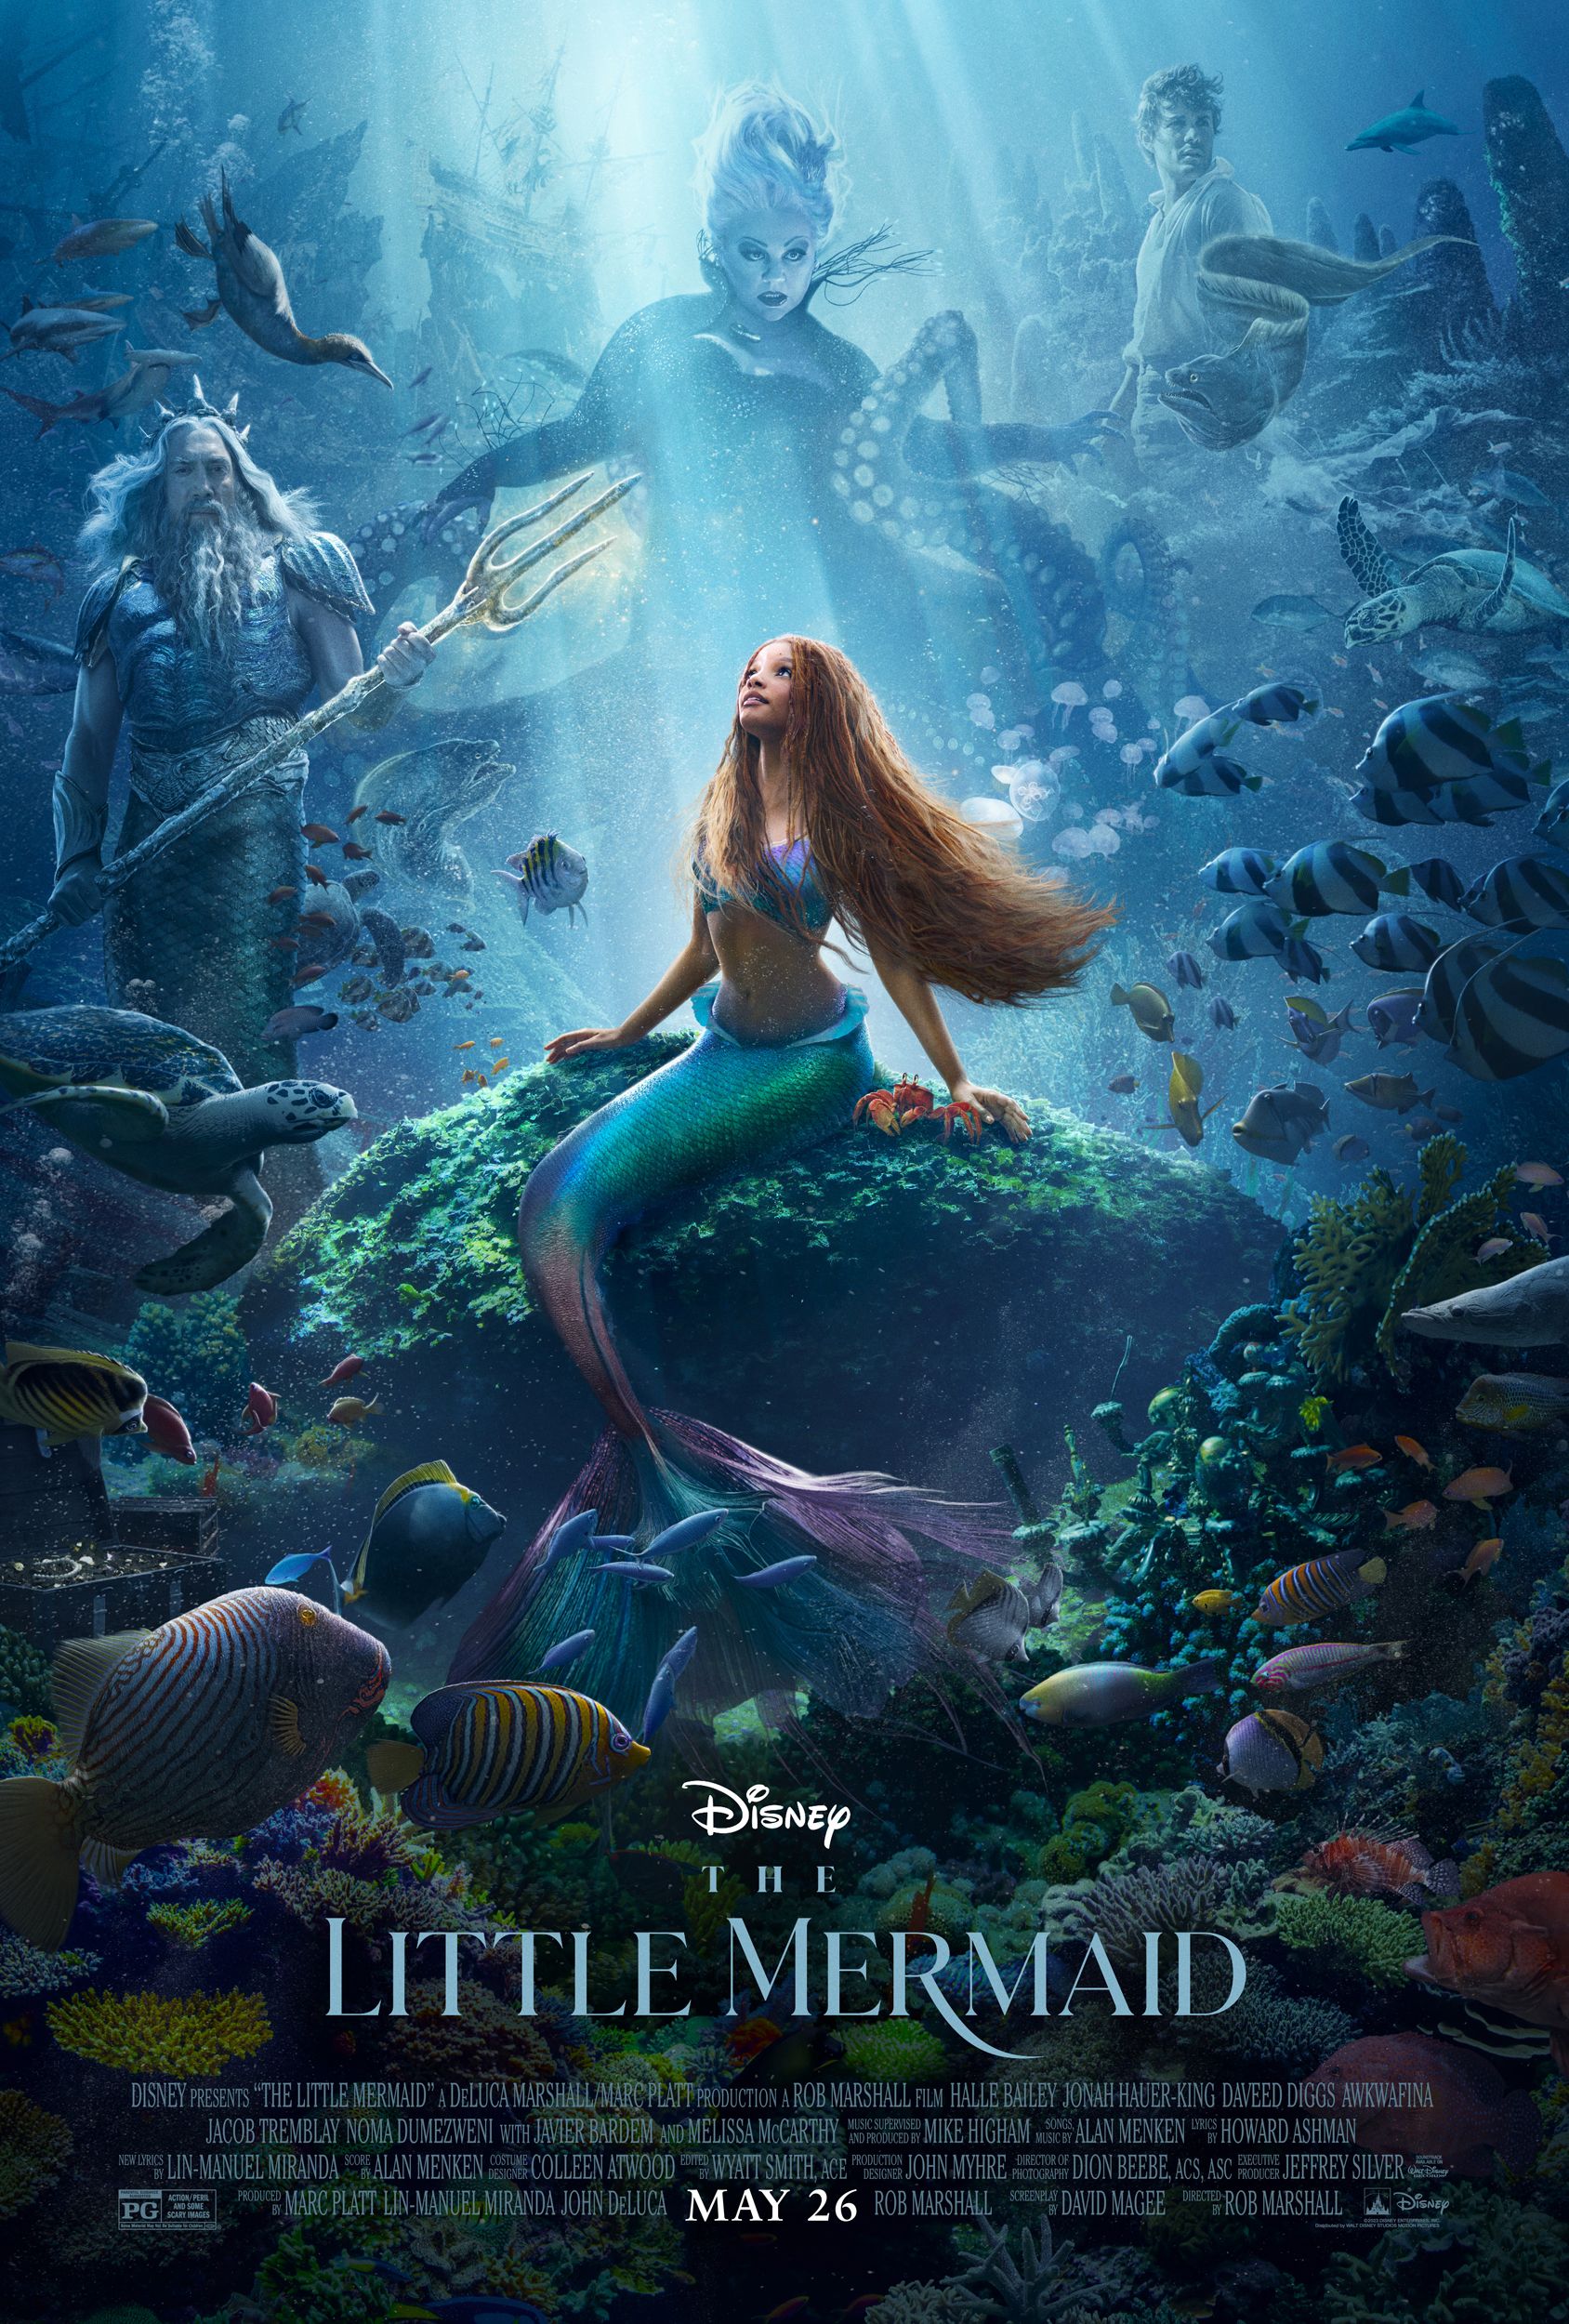 First Look: ‘The Little Mermaid’ Starring Halle Bailey